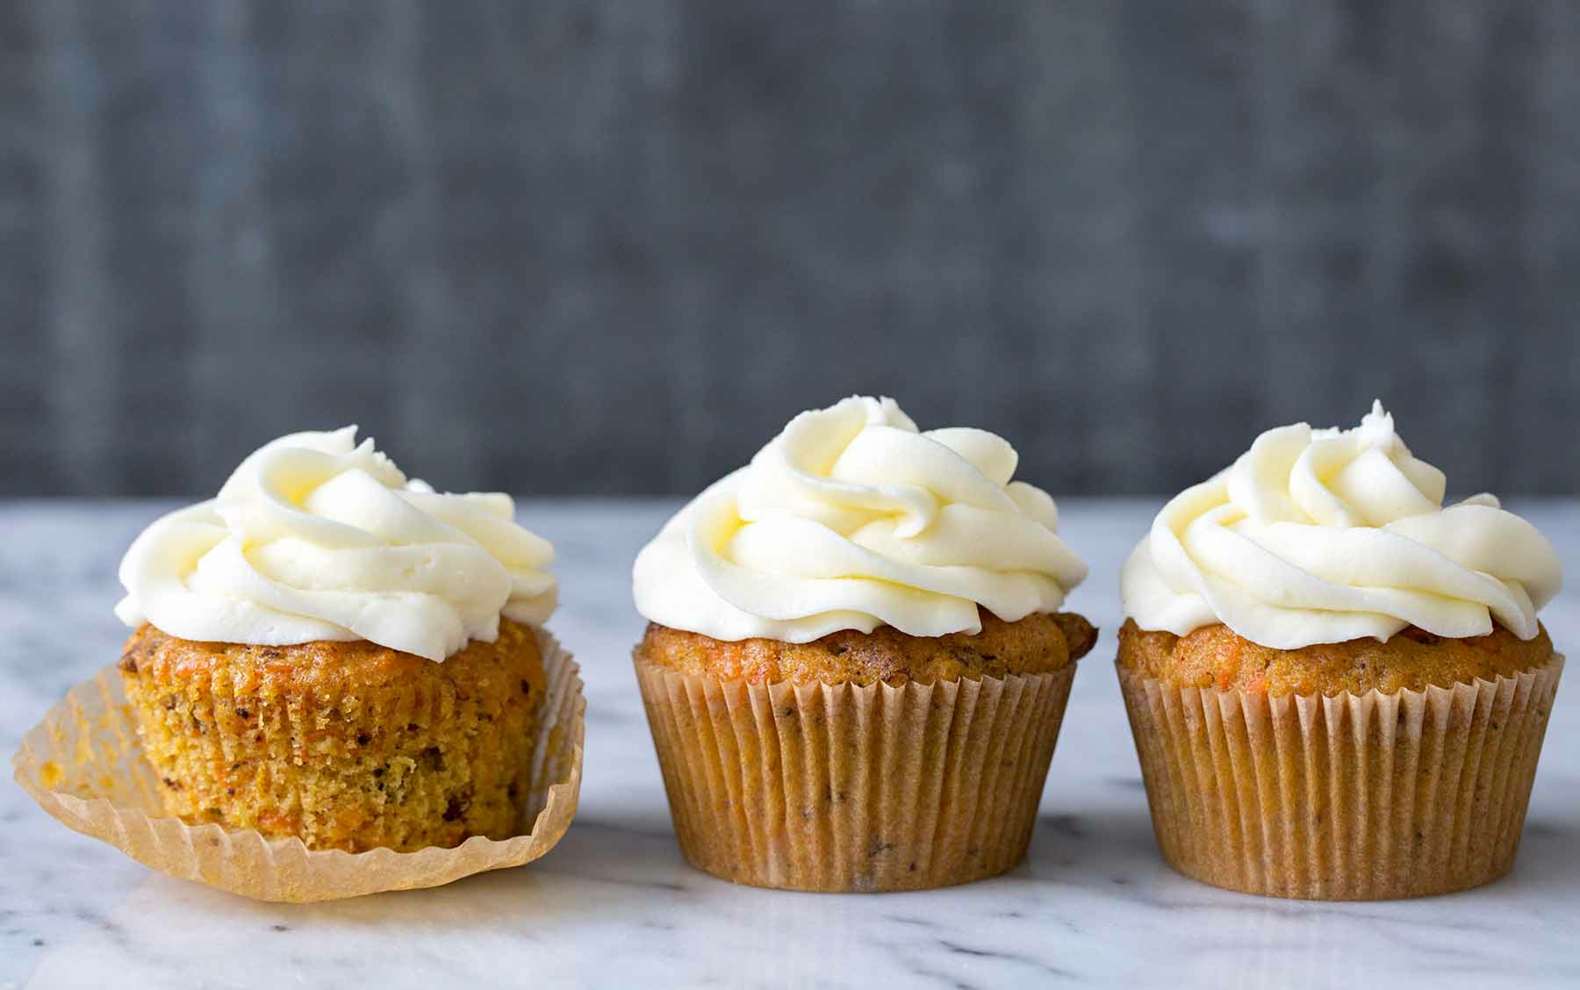 Bienenstich Muffins Cupcakes Vanilla Frosting Just Calorie Low Low Carb Muffins